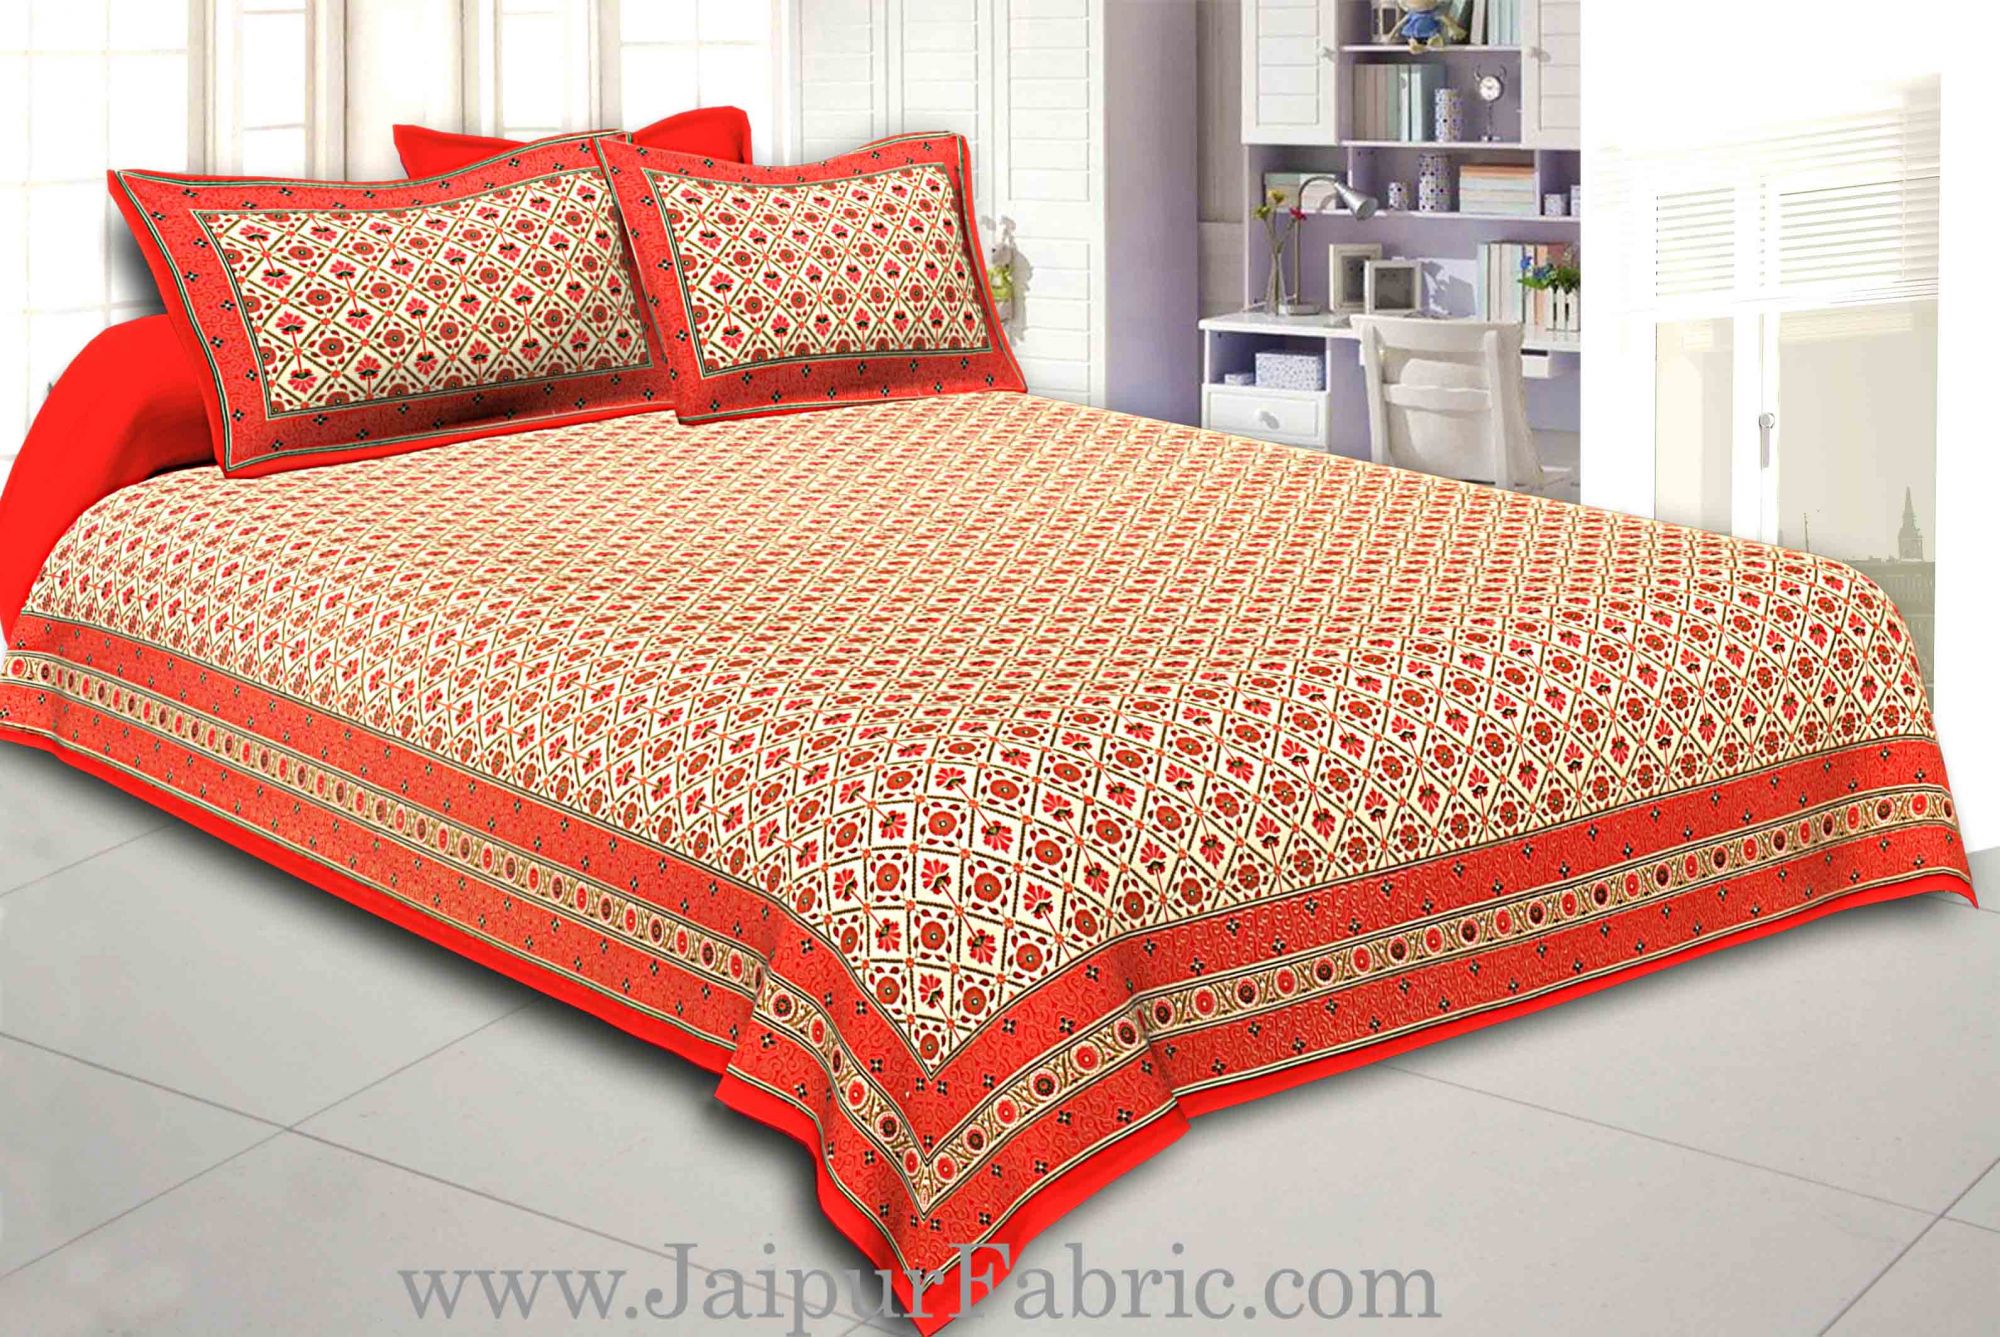 Red Border Multi floral With Golden Print Super Fine Cotton Double Bed Sheet